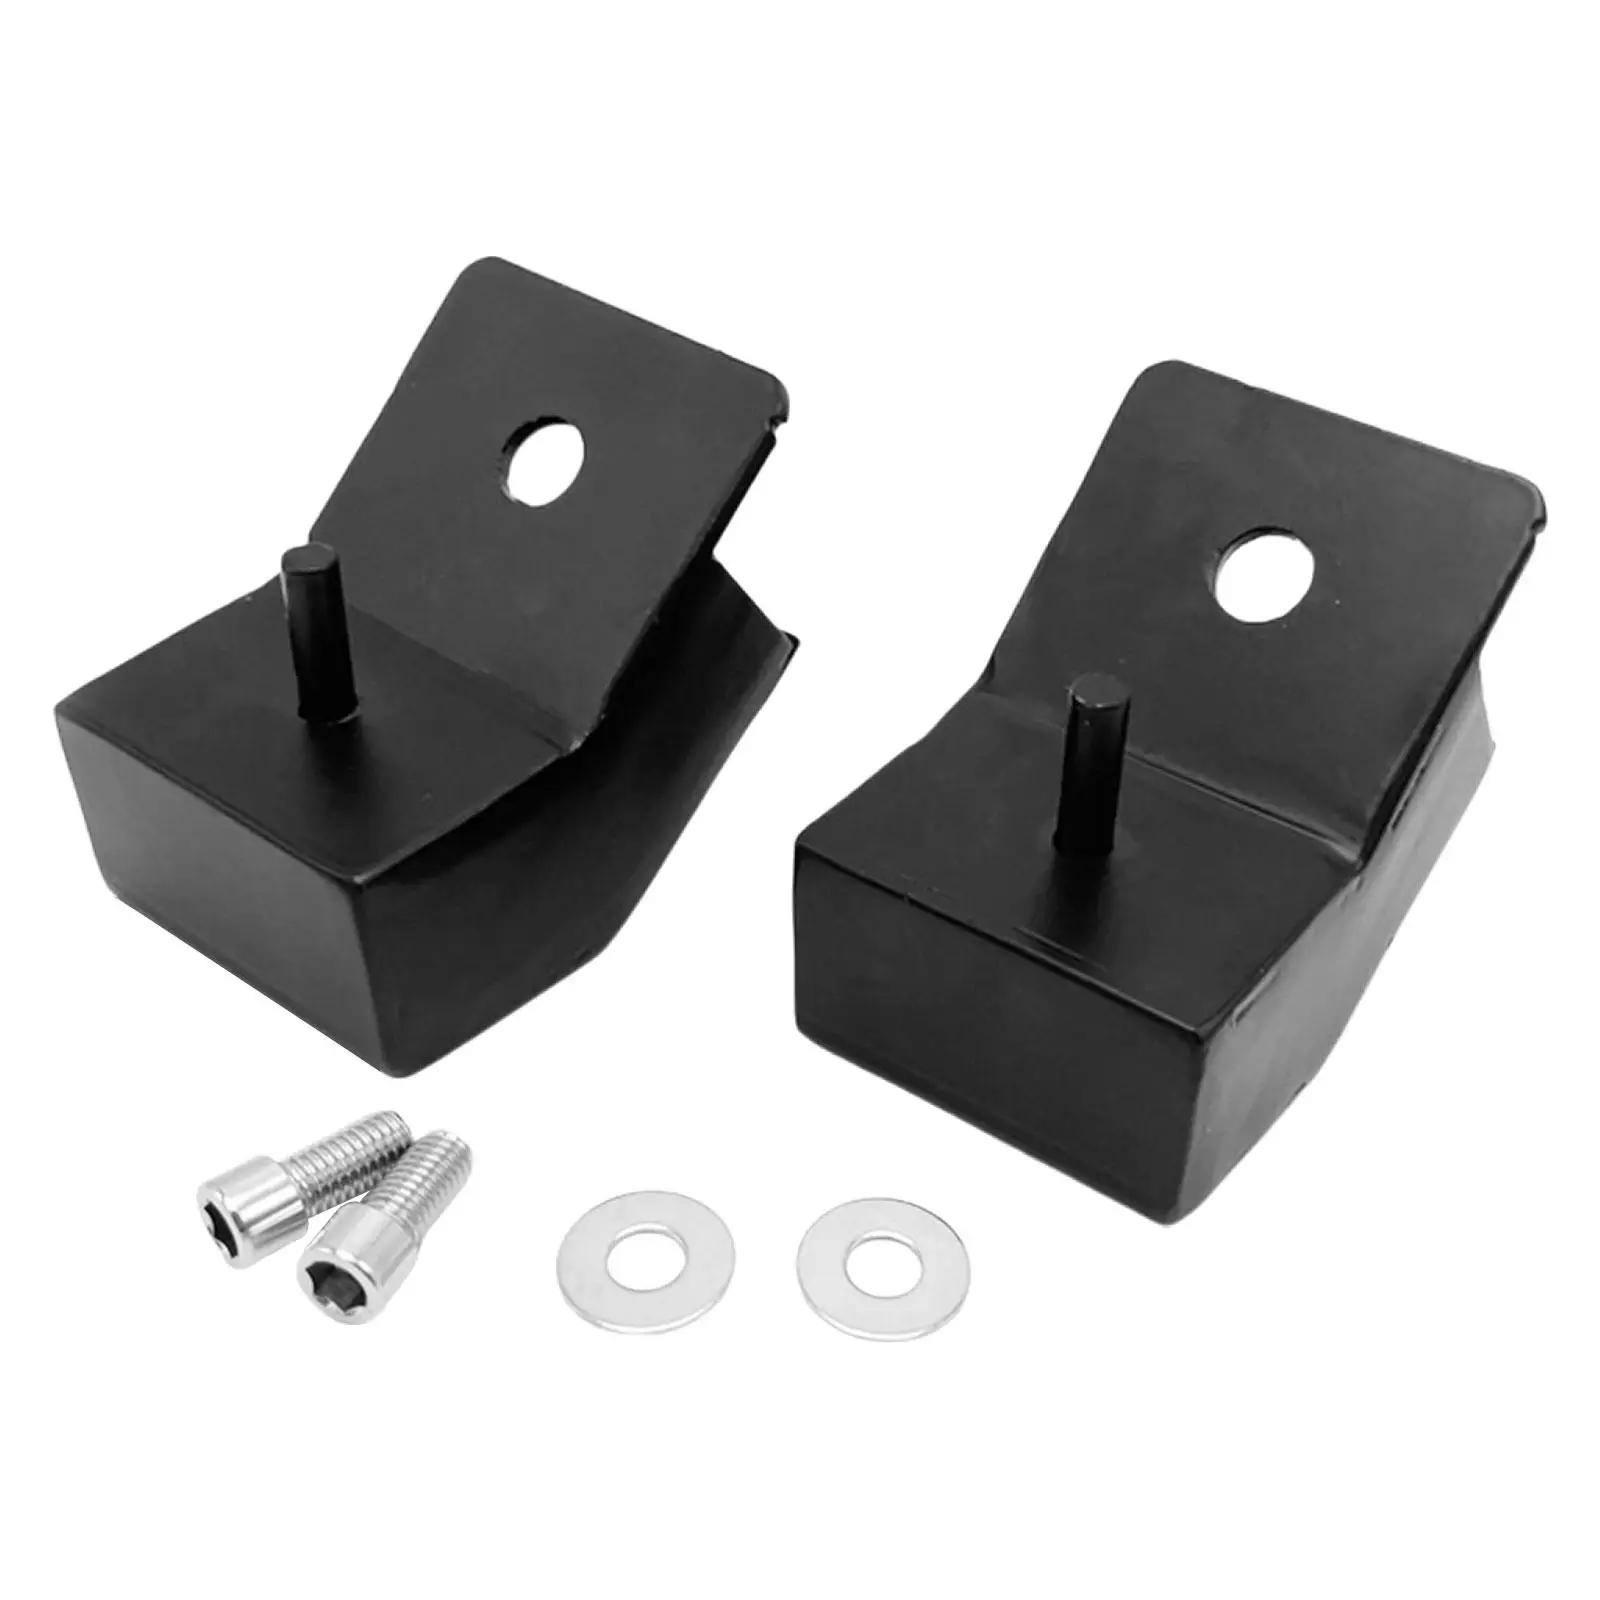 Front Seat Jackers Riser Front Seat Cushion Kit Car Accessories High Performance Front Seat Spacers Jackers Kit for Gx470